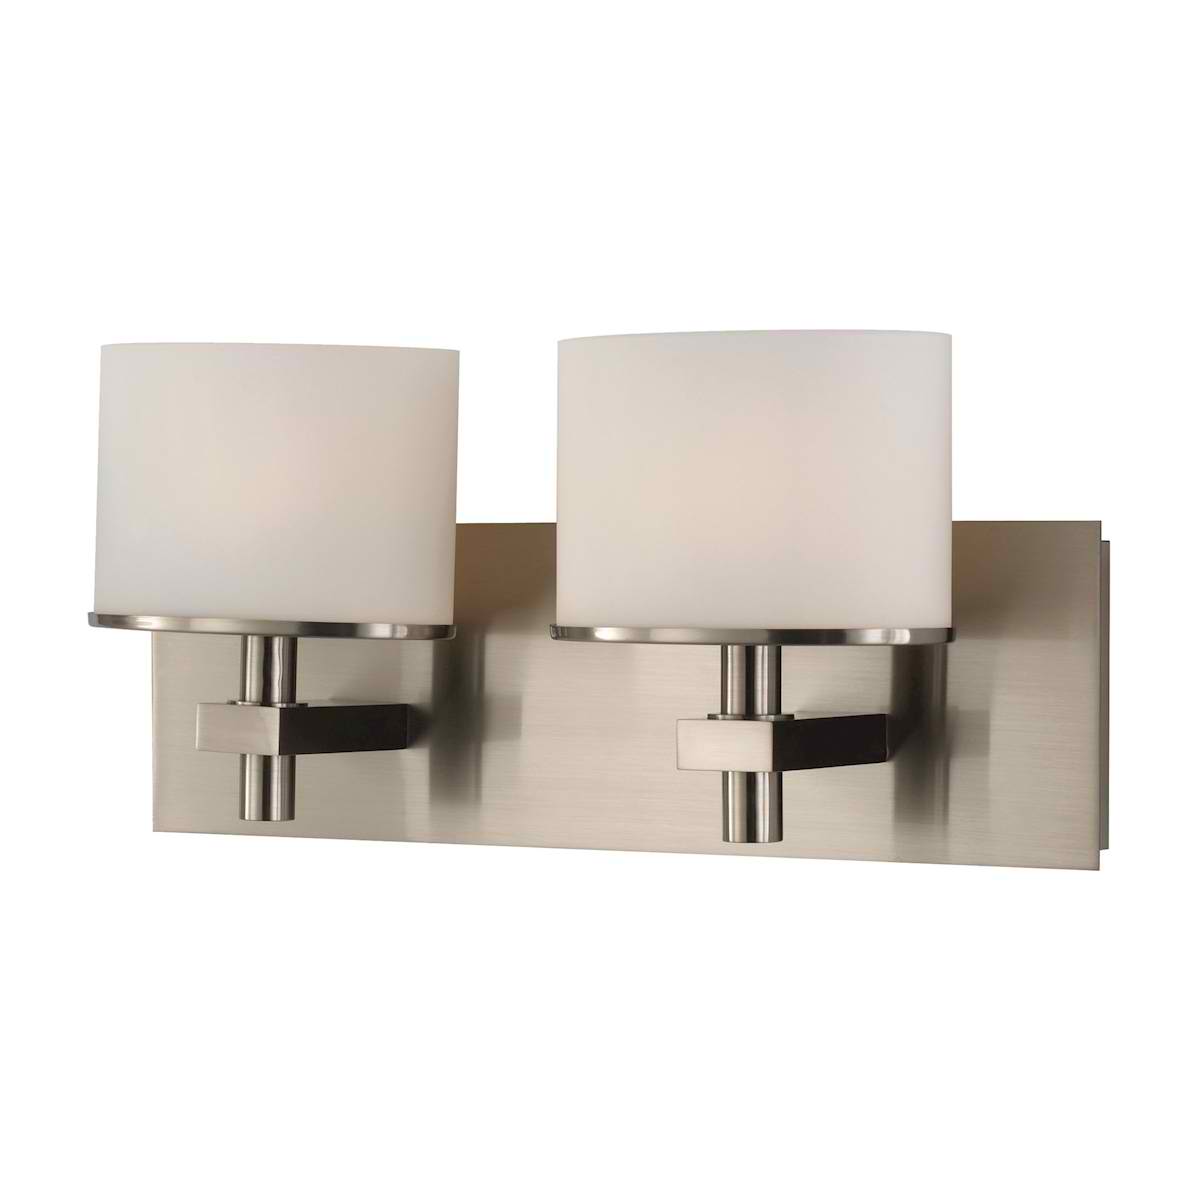 Ombra Vanity - 2 Light with Lamp White Opal Glass / Satin Nickel